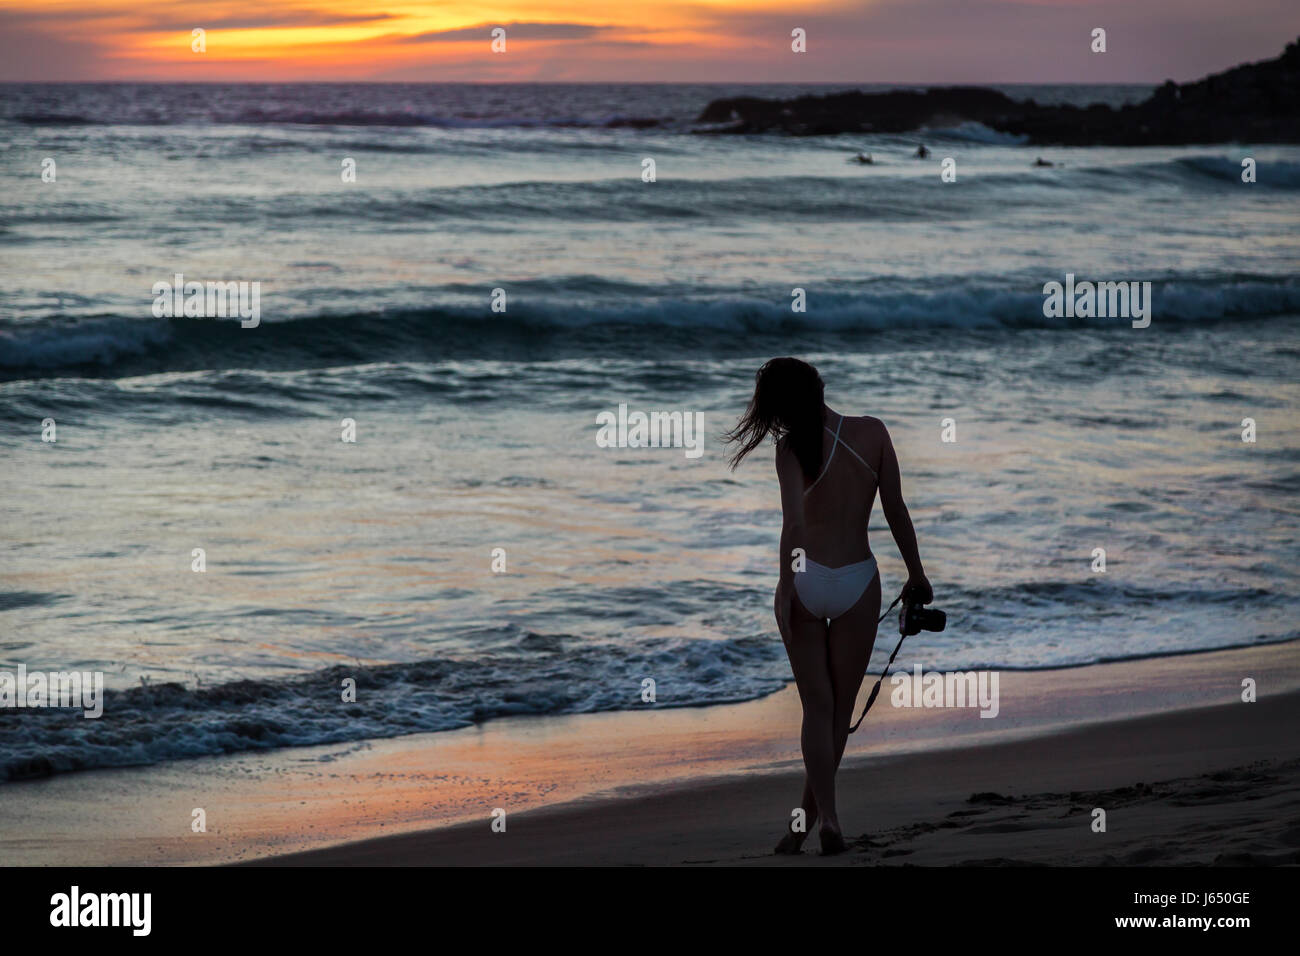 Pretty young woman on a beach at sunset with a camera in her hand. Stock Photo